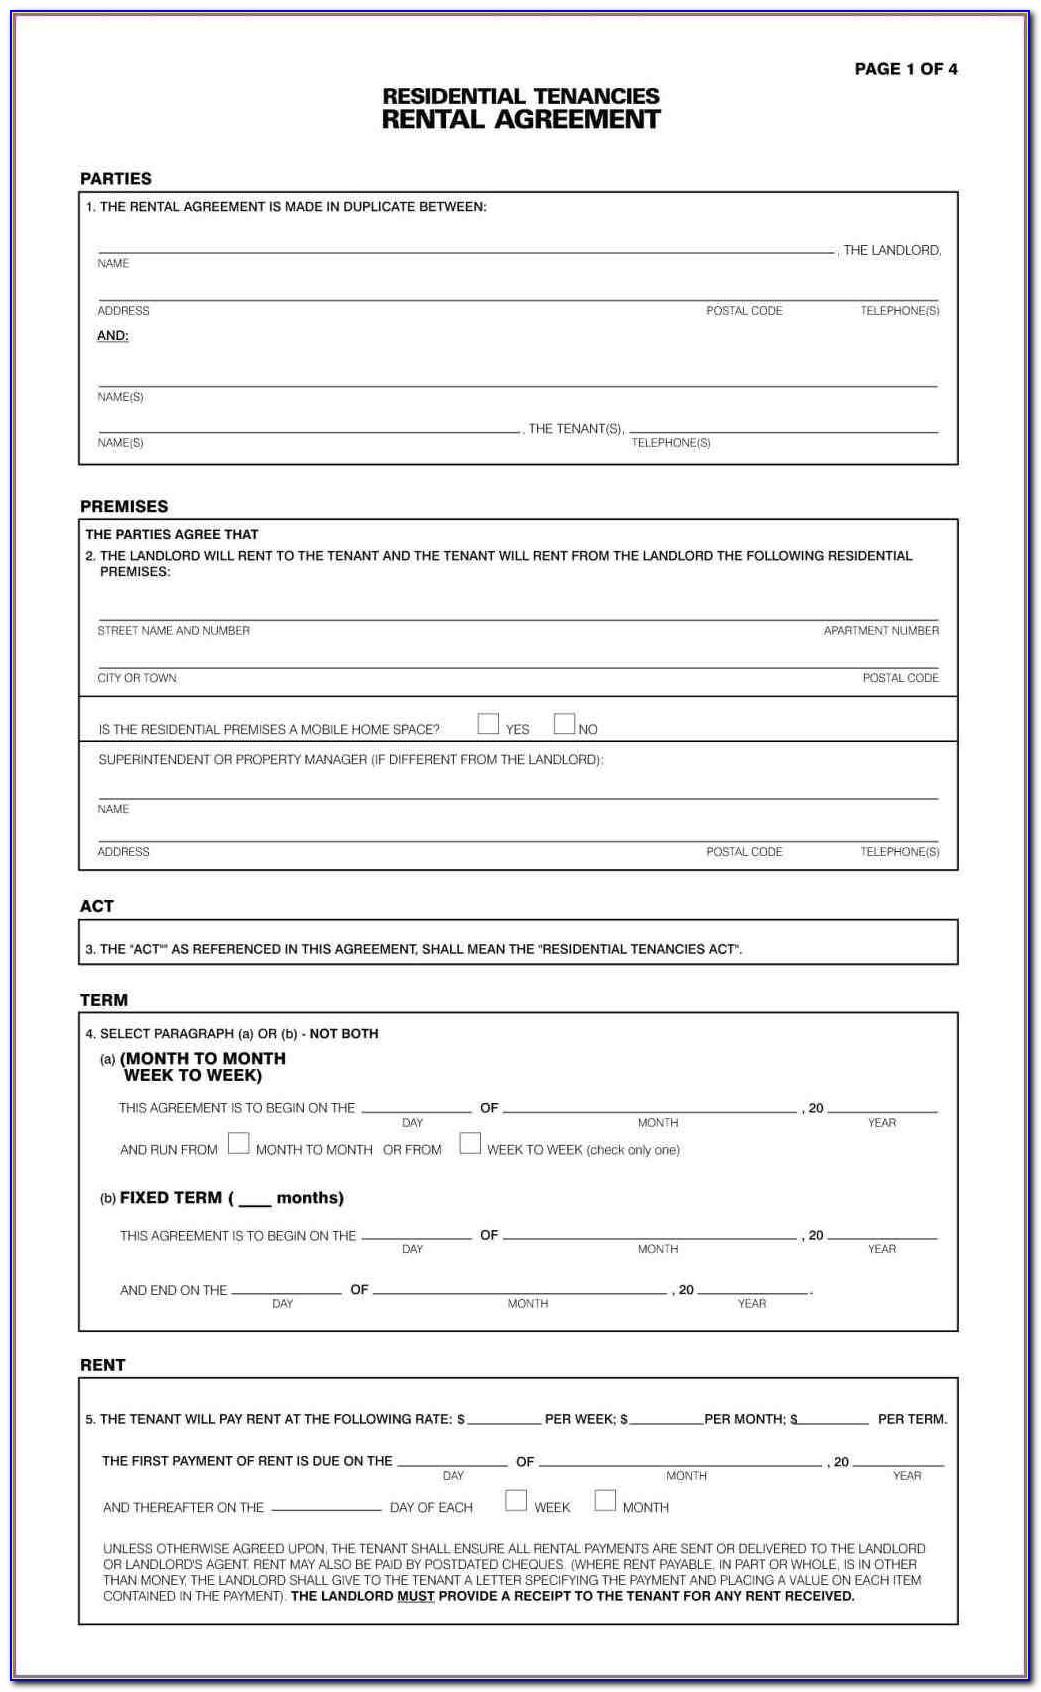 assured-shorthold-tenancy-agreement-template-free-download